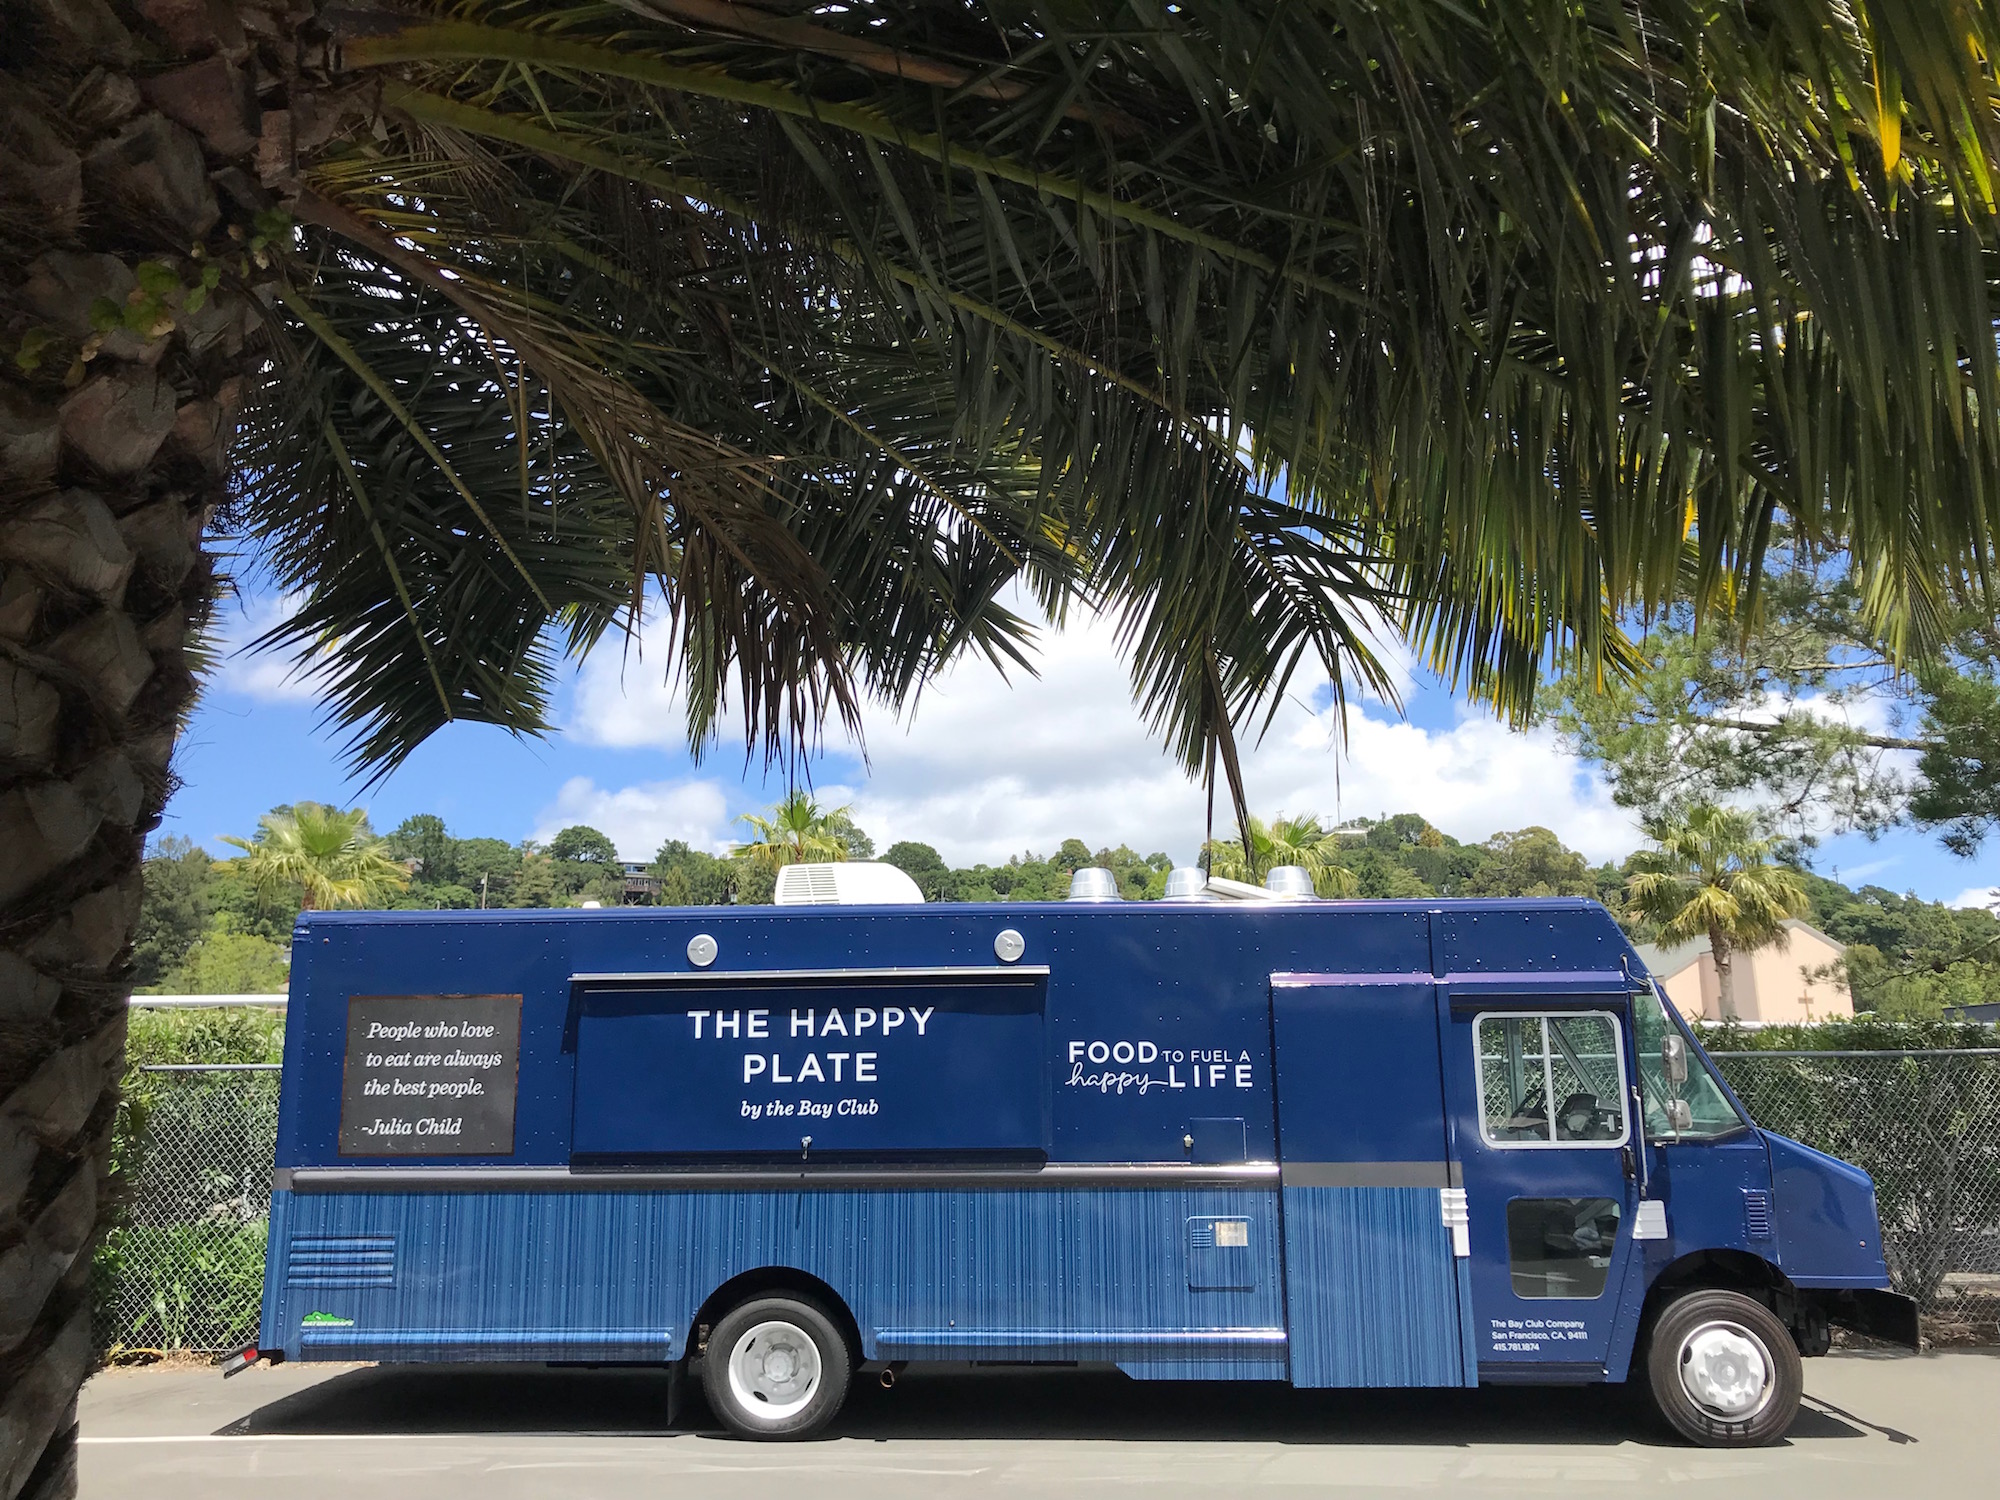 Introducing our New Food Truck: The Happy Plate